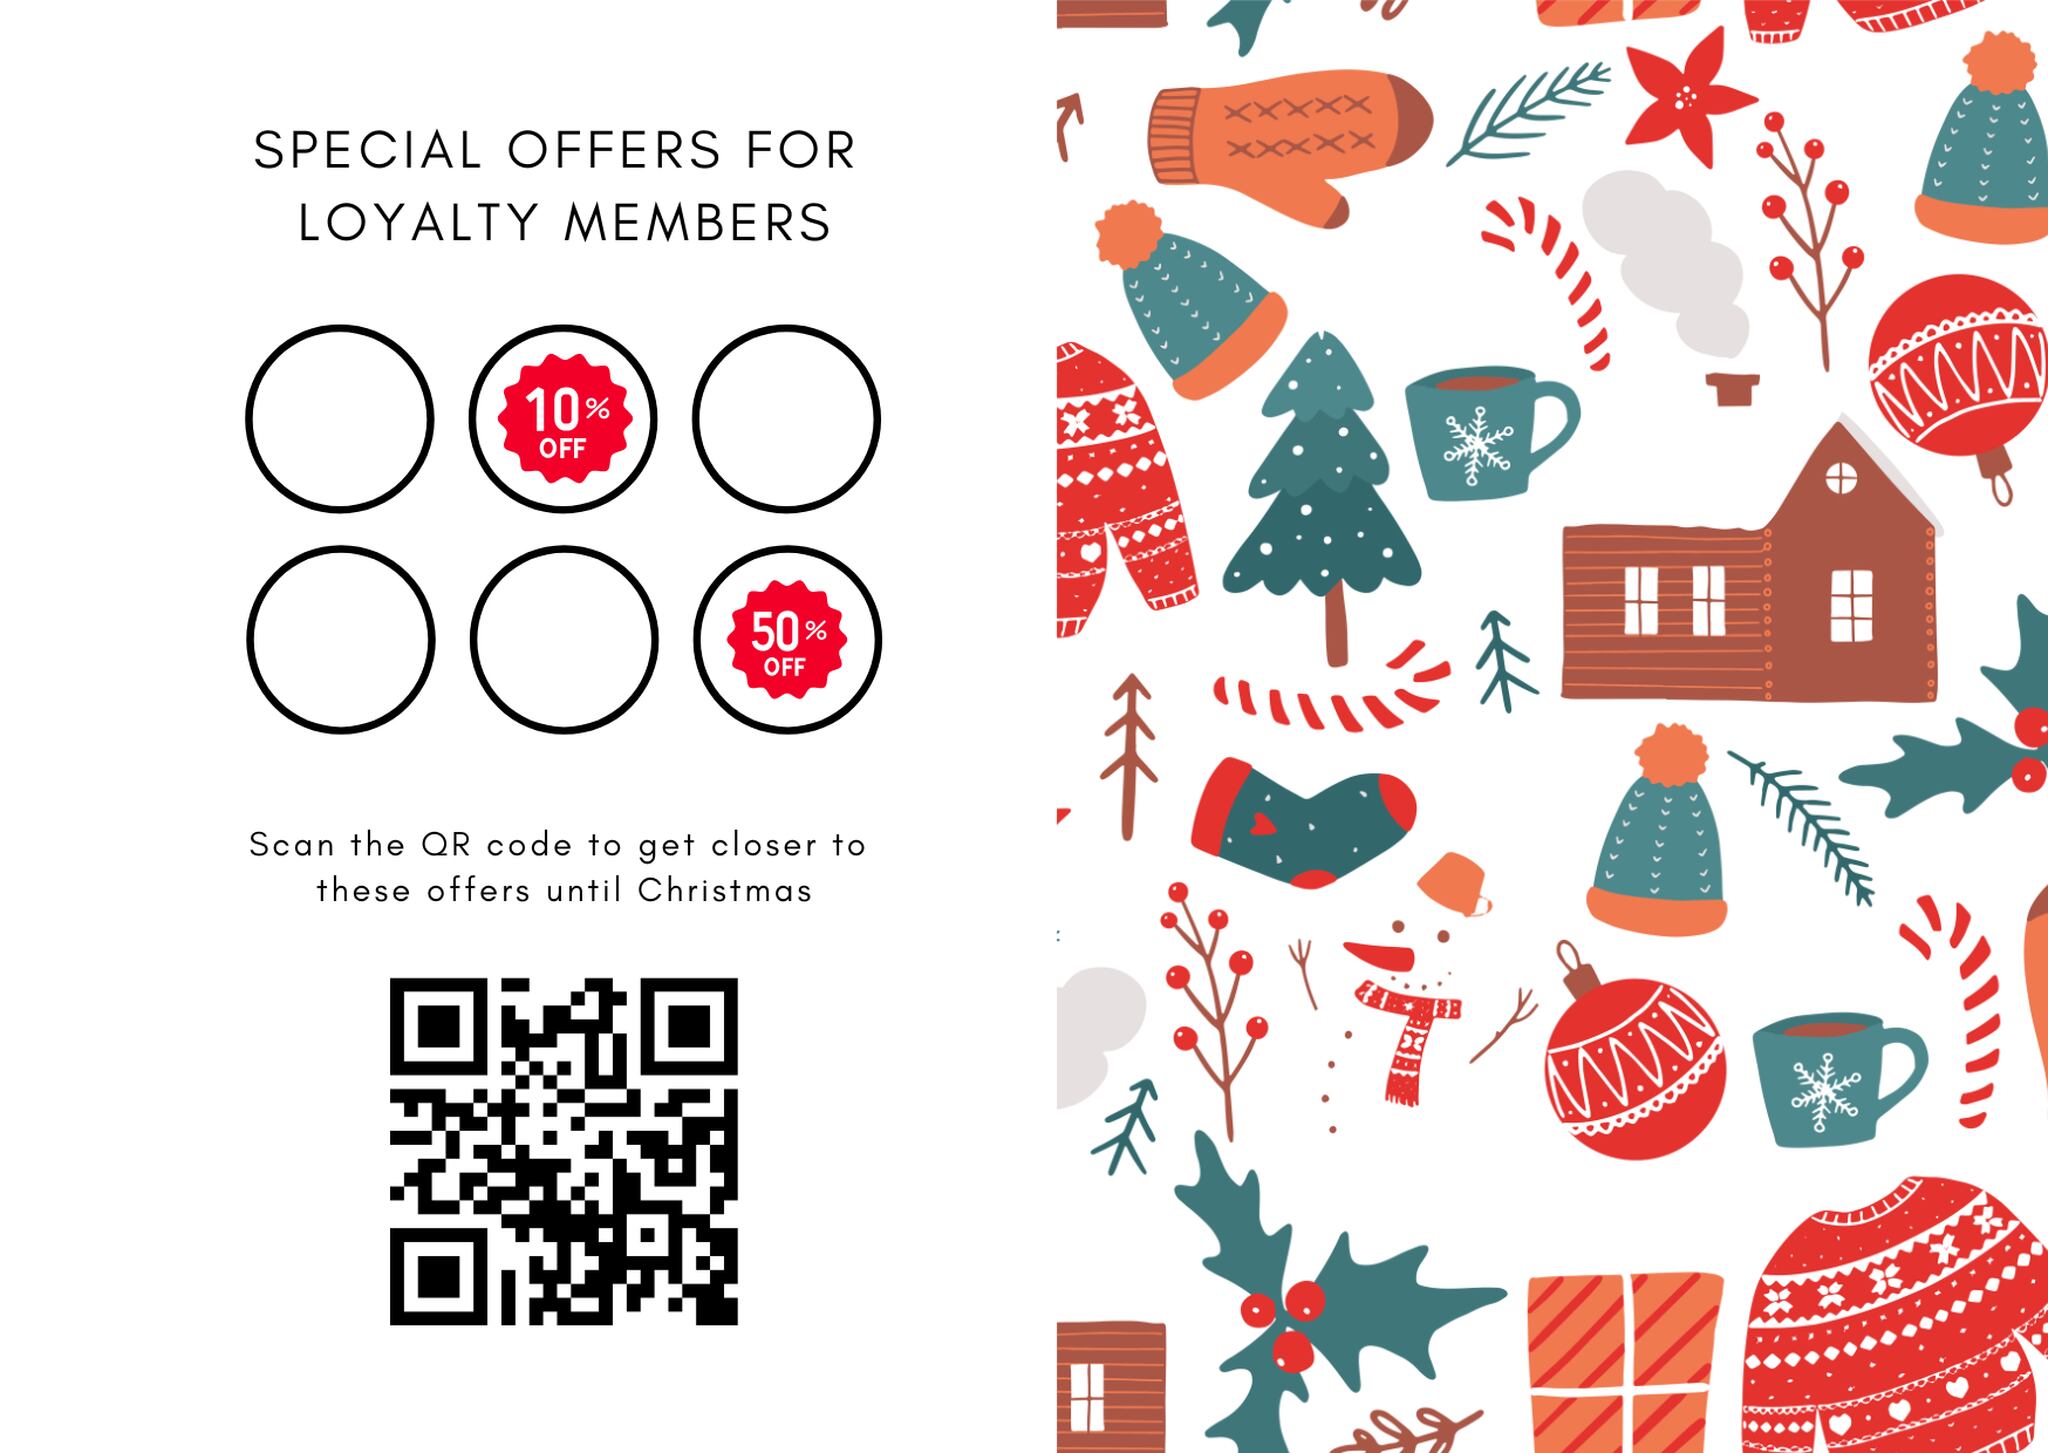 loyalty card template for Christmas with a QR code